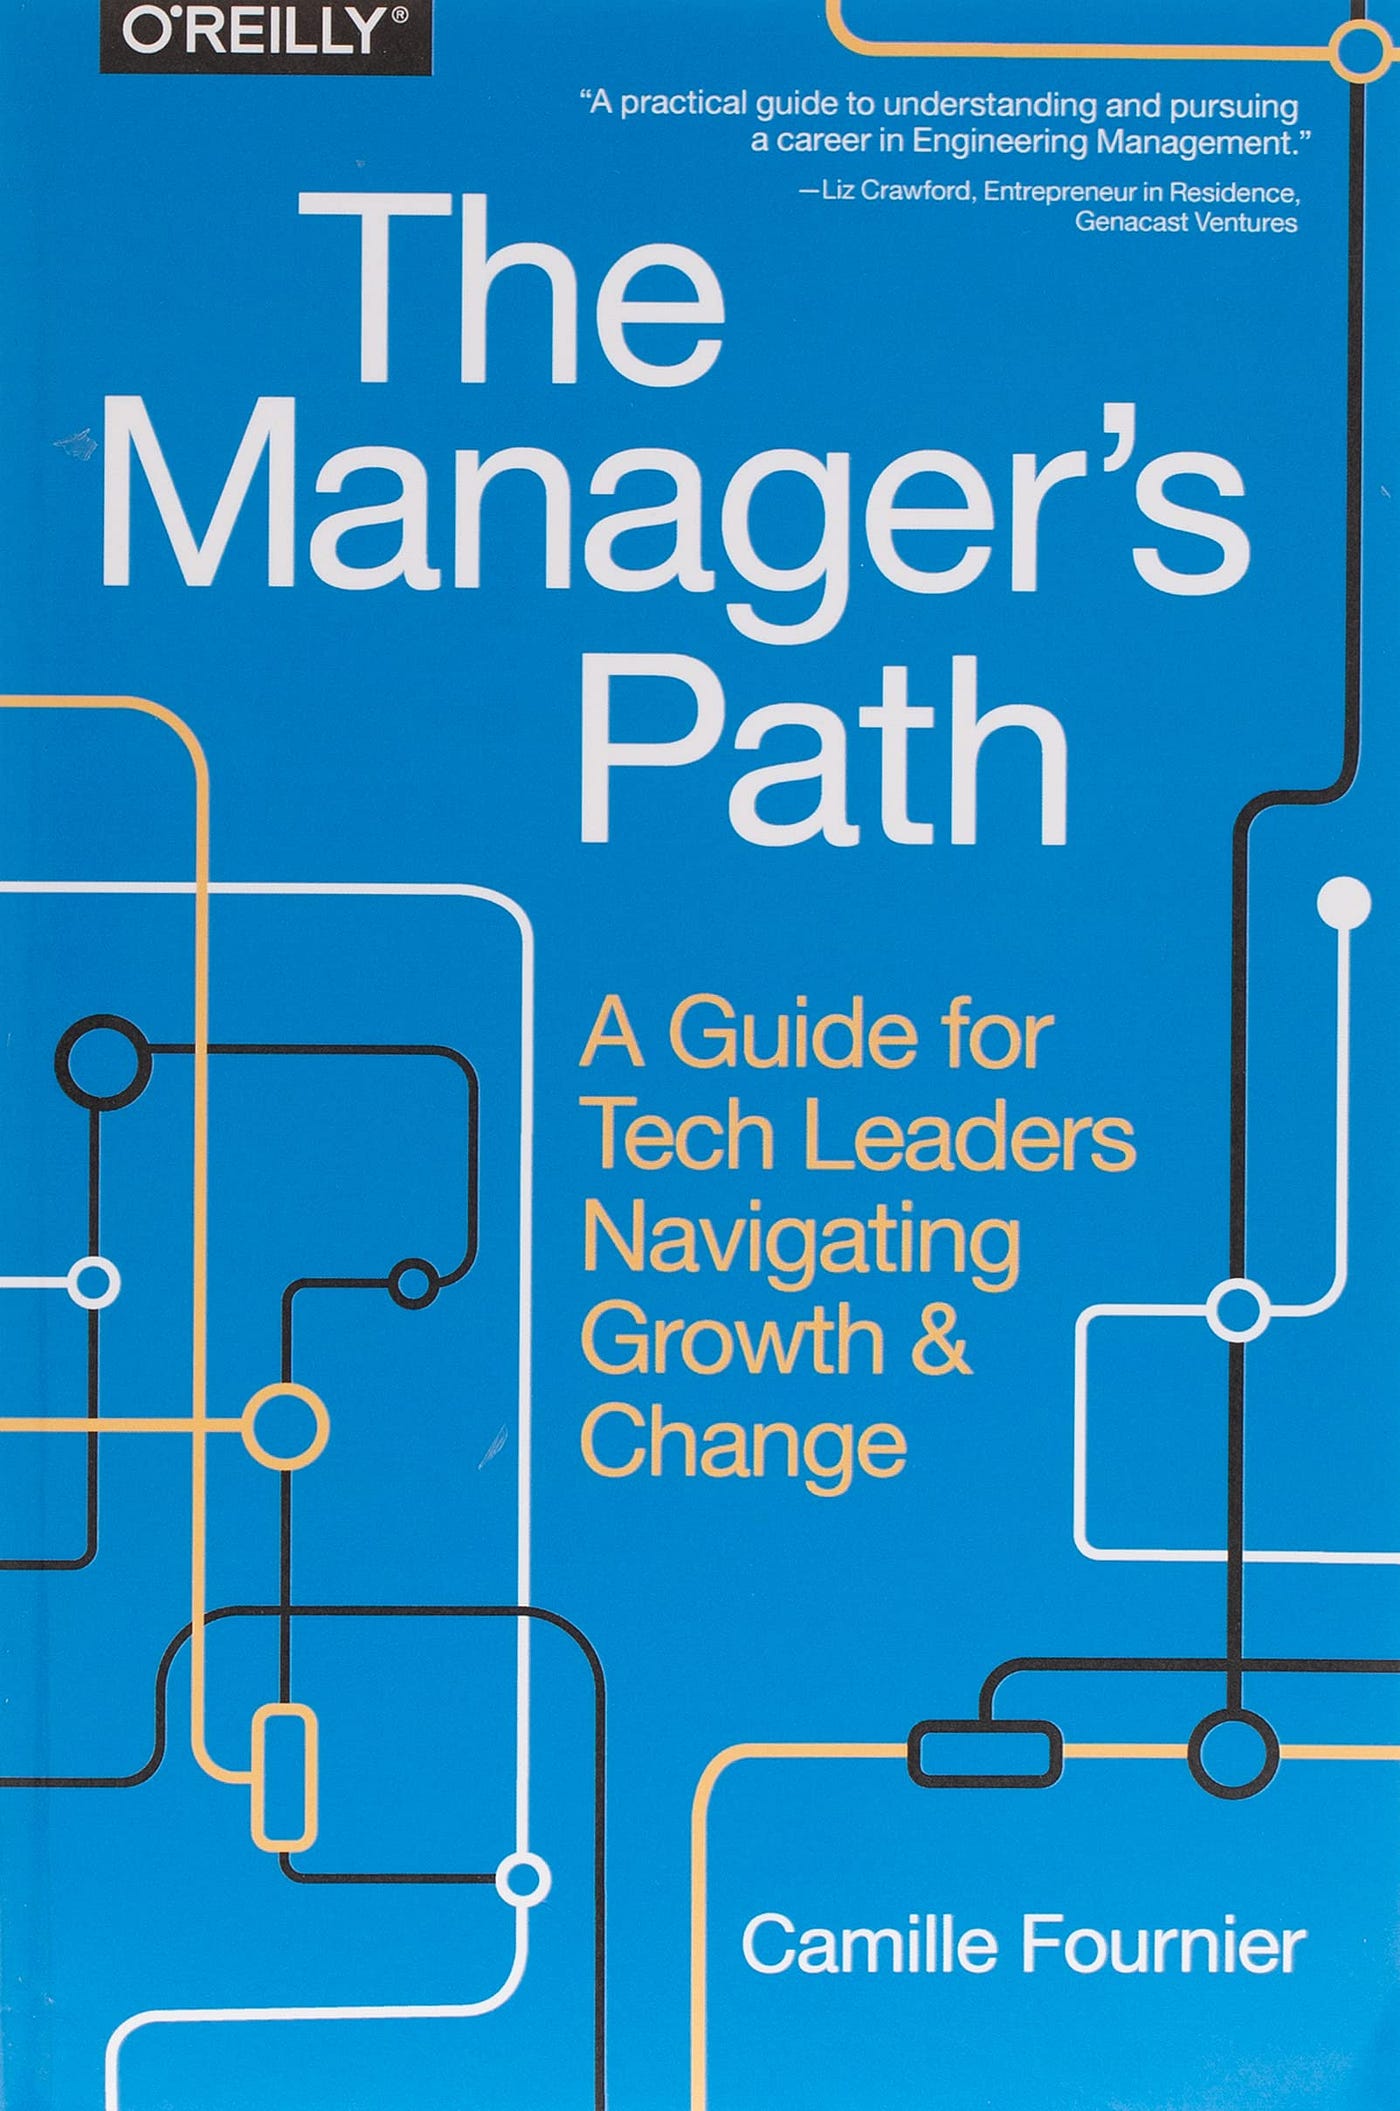 The Manager’s Path by Camille Fournier, 2017, O’Reilly Media